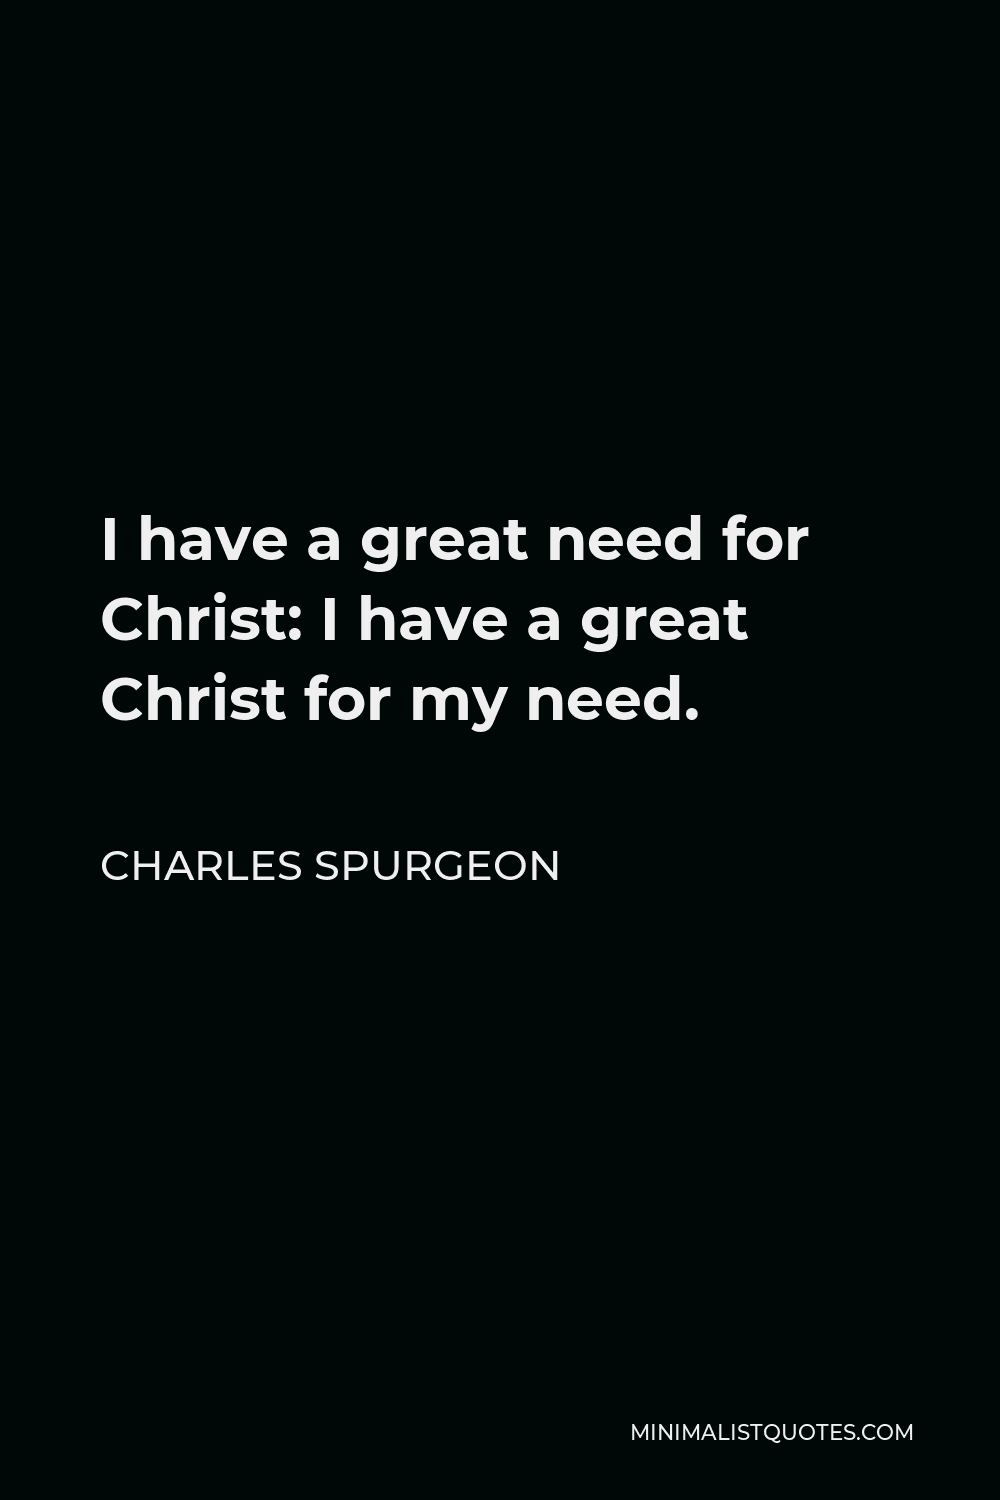 Charles Spurgeon Quote - I have a great need for Christ: I have a great Christ for my need.